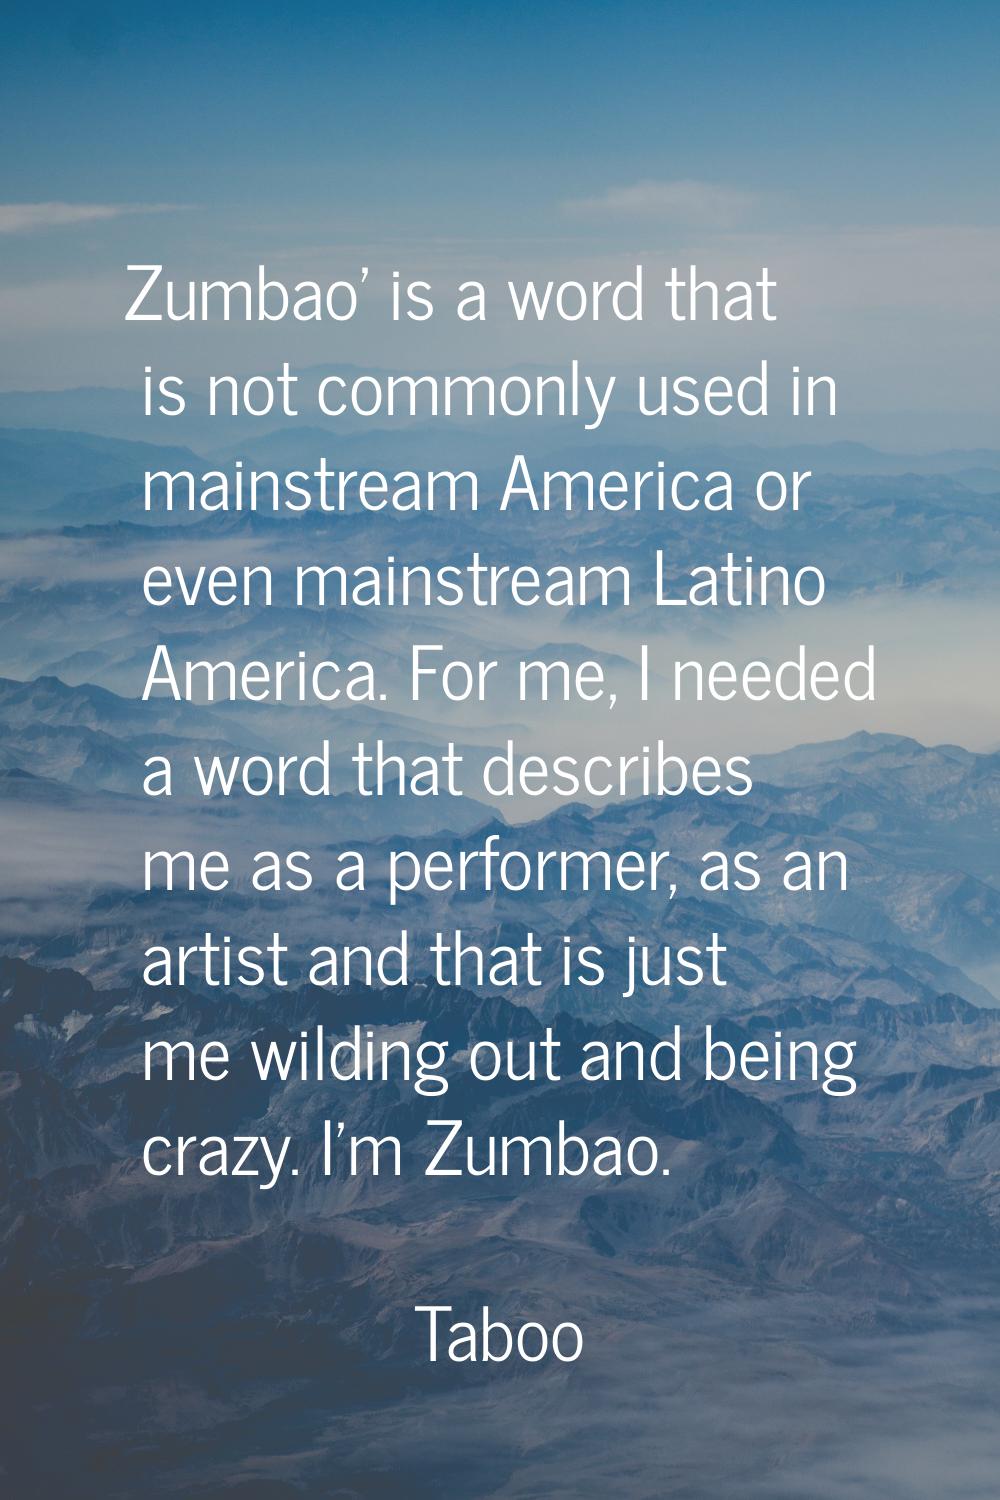 Zumbao' is a word that is not commonly used in mainstream America or even mainstream Latino America